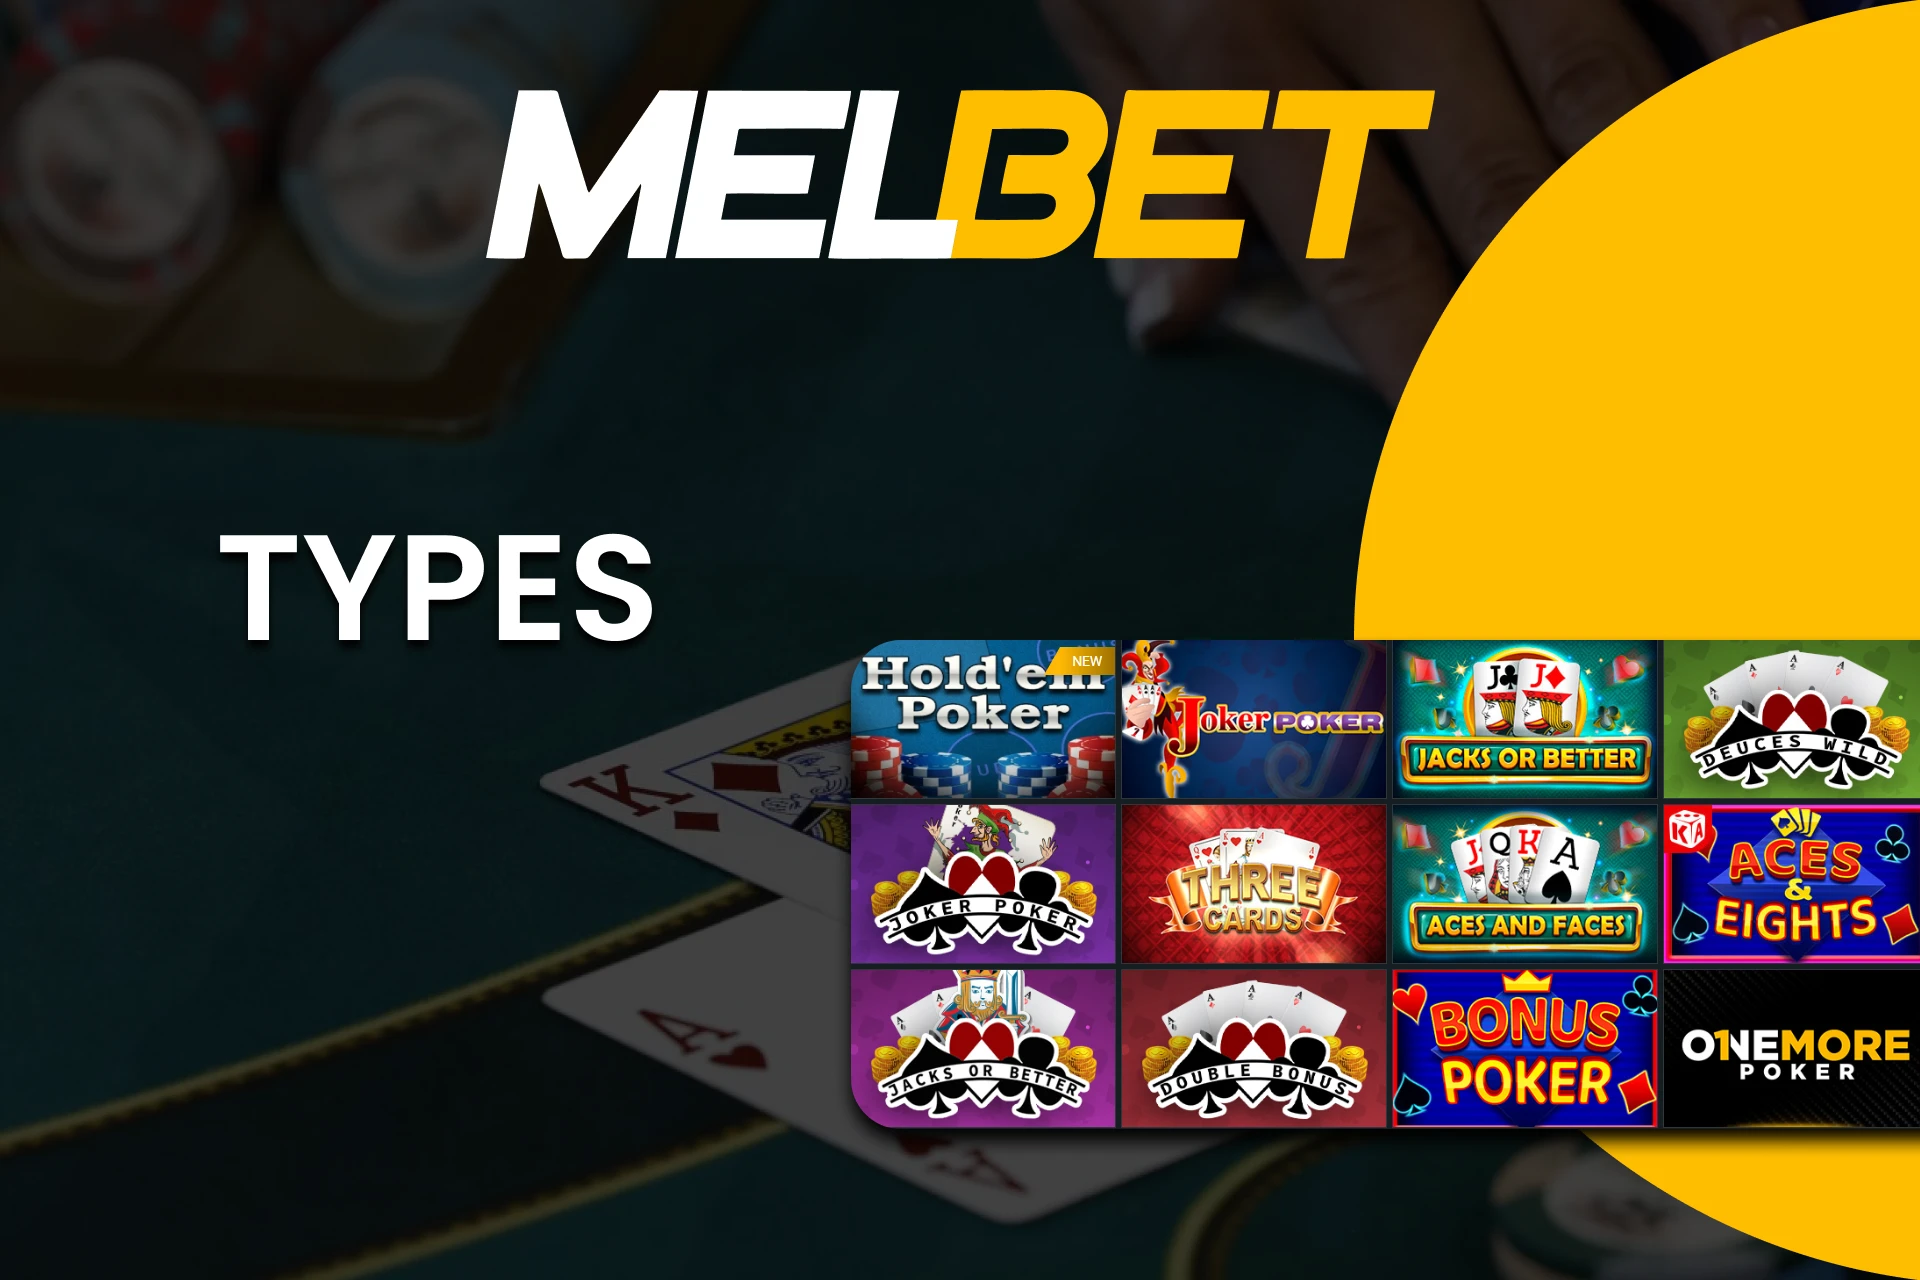 We will tell you about the types of Poker at Melbet.